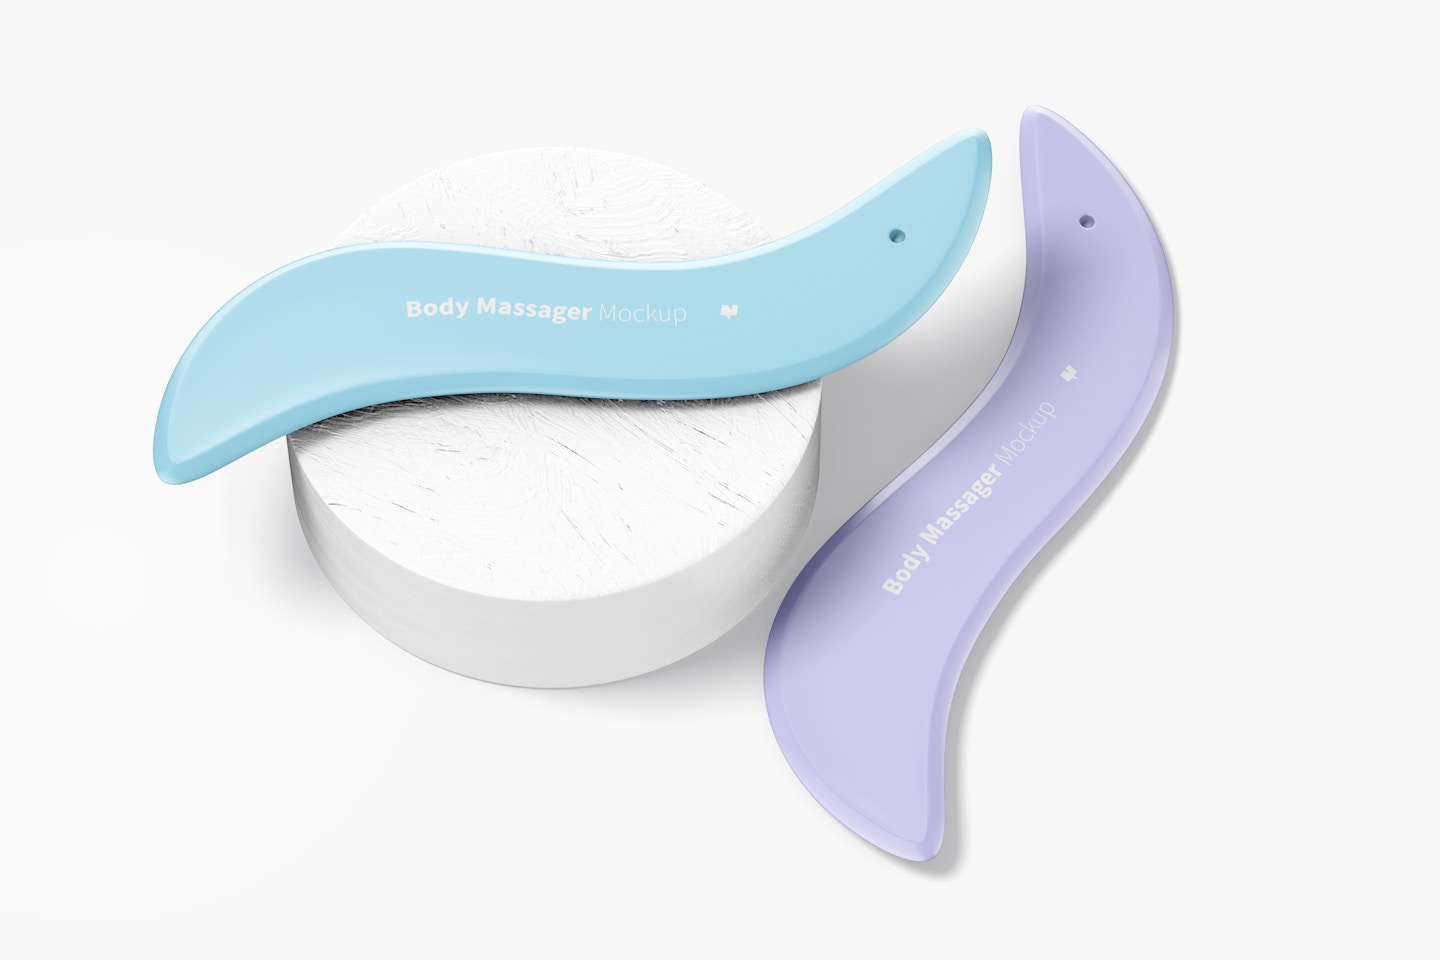 Body Massagers Mockup, Perspective View